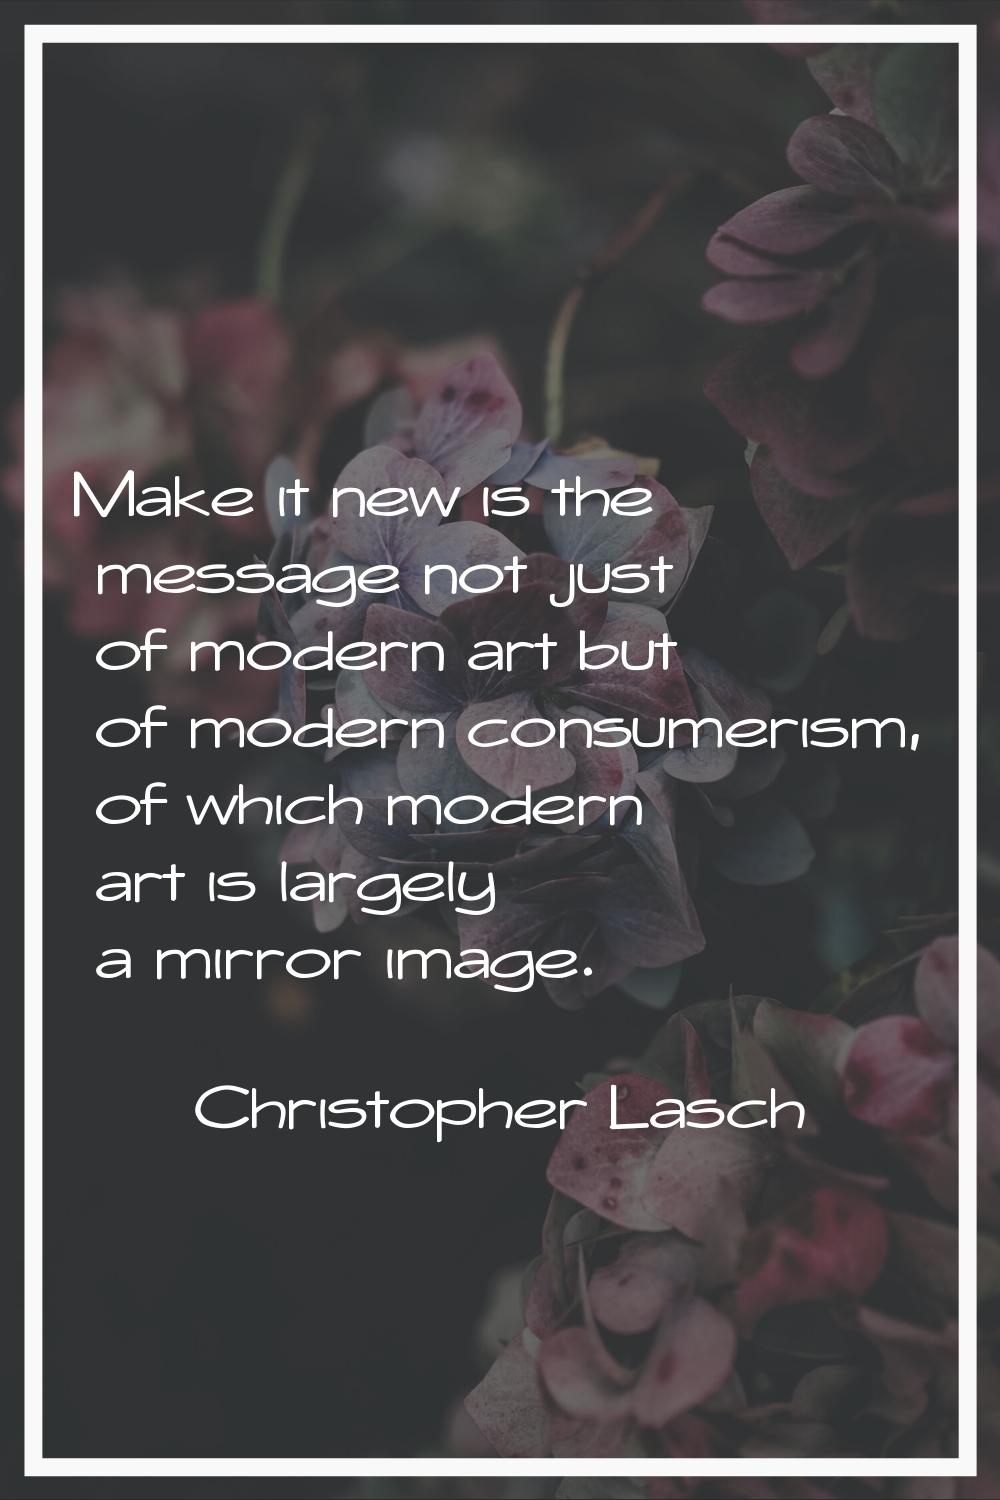 Make it new is the message not just of modern art but of modern consumerism, of which modern art is